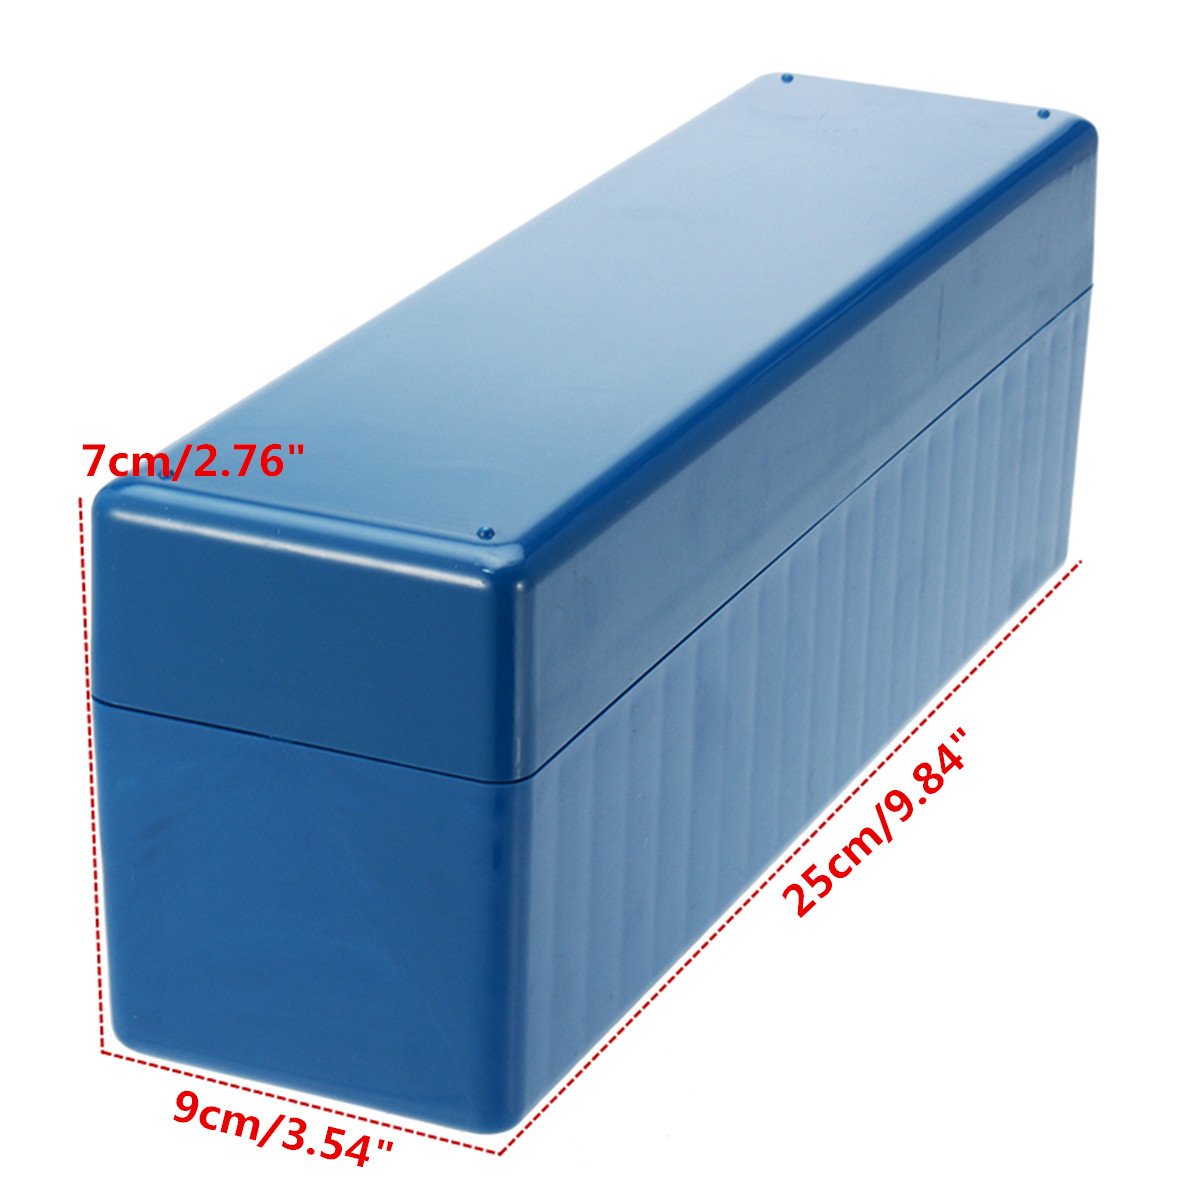 25x9x7cm-Blue-Storage-Tool-Box-Case-Holds-20-Individual-Certified-PCGS-NGC-ICG-Coin-Holders-1425243-7